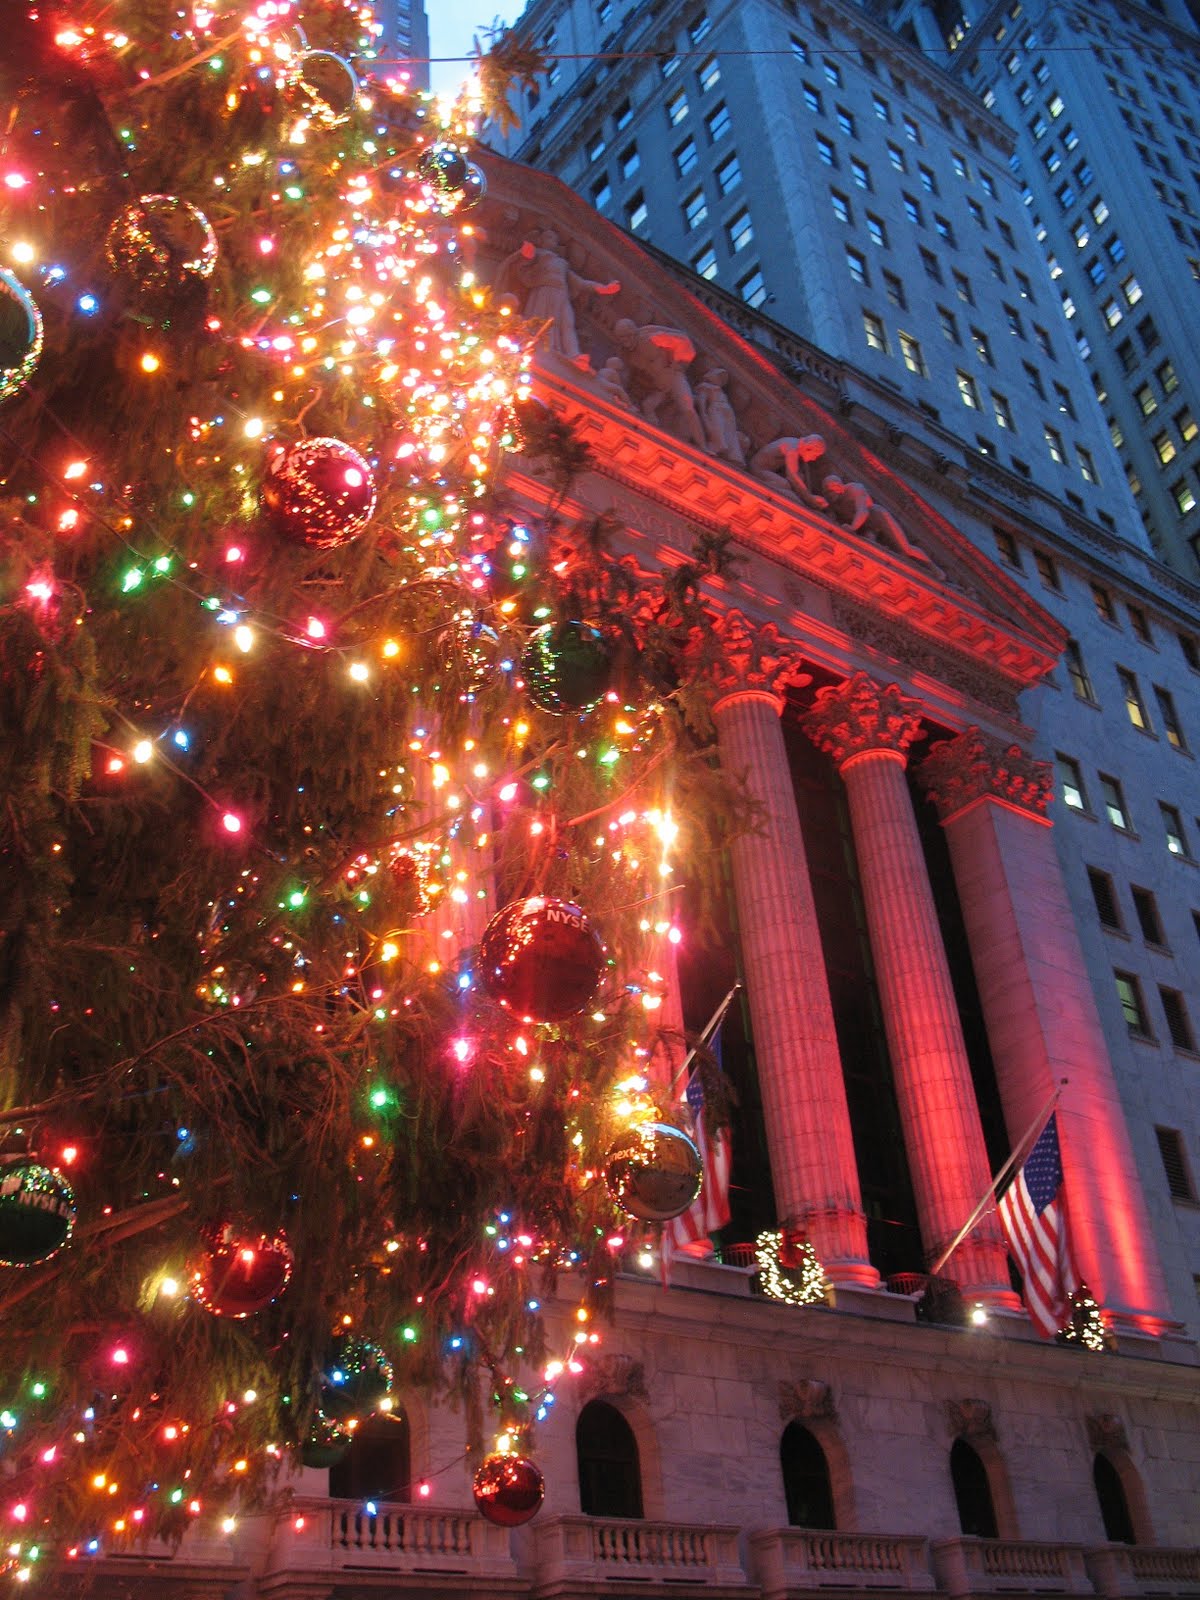 Mille Fiori Favoriti: Wall Street Christmas Tree & the Voices of the ...